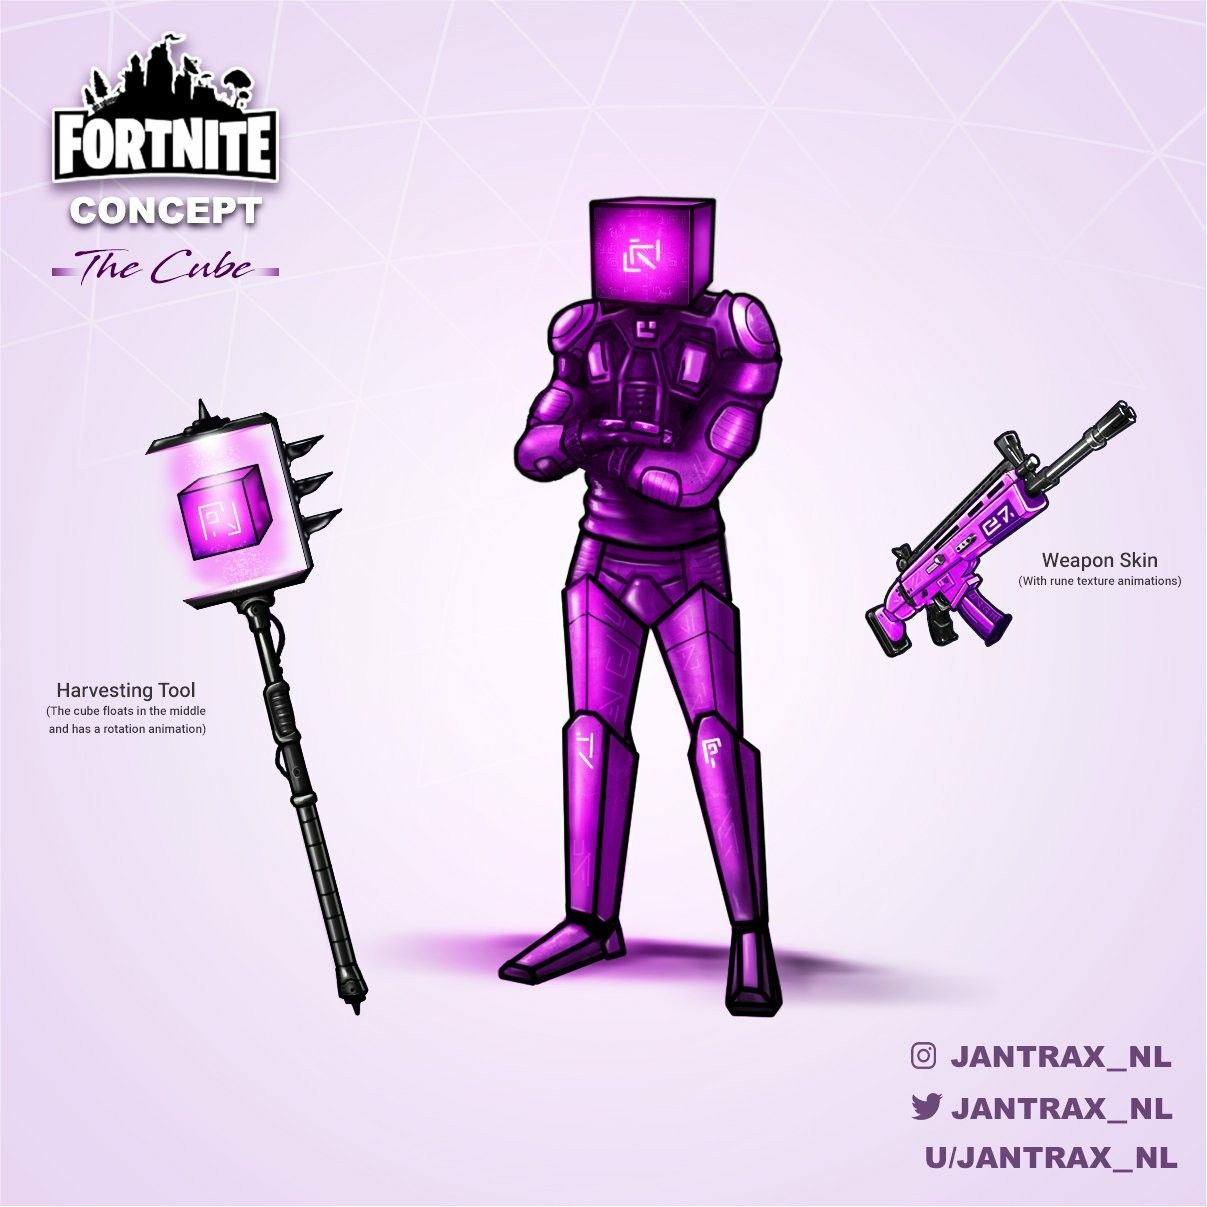 Kevin The Cube Concept Art Characters In Gaming